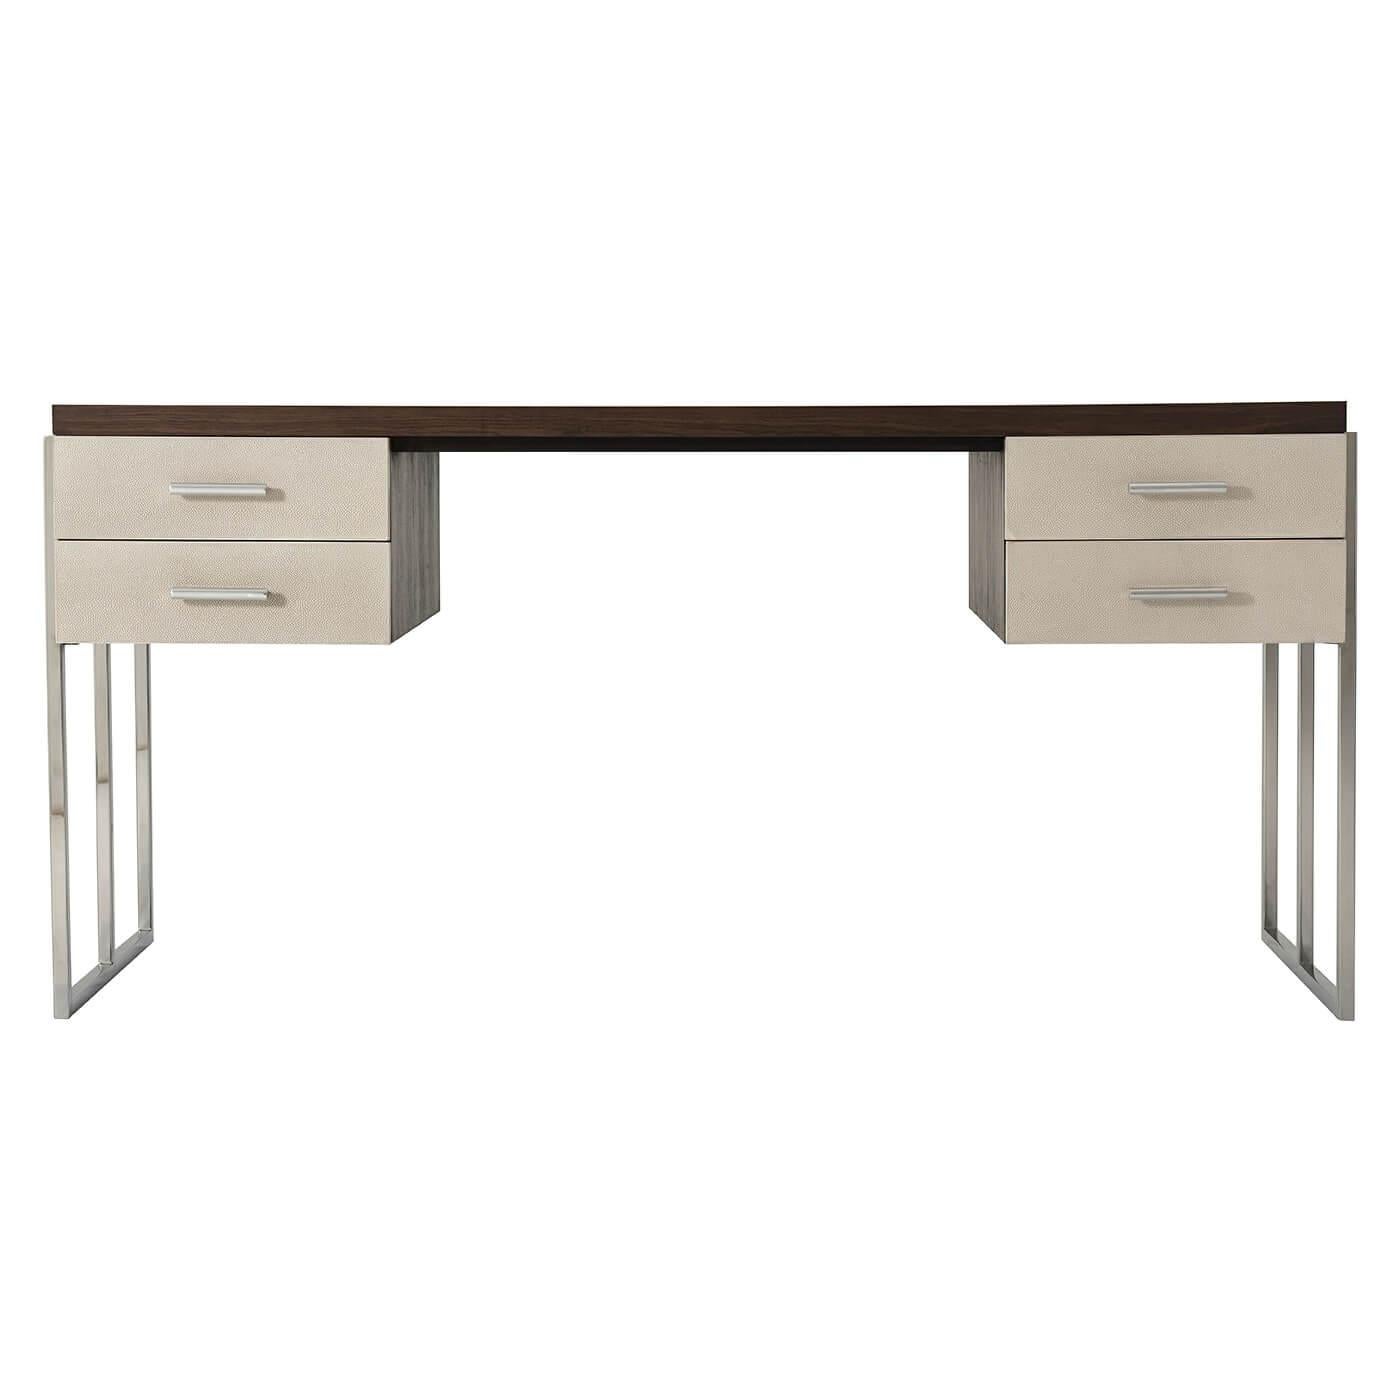 Modern desk with rectangular starburst veneered walnut grain top with a Macadamia finish, four overcast shagreen inlaid drawers with polished nickel handles and side supports.

Dimensions: 63